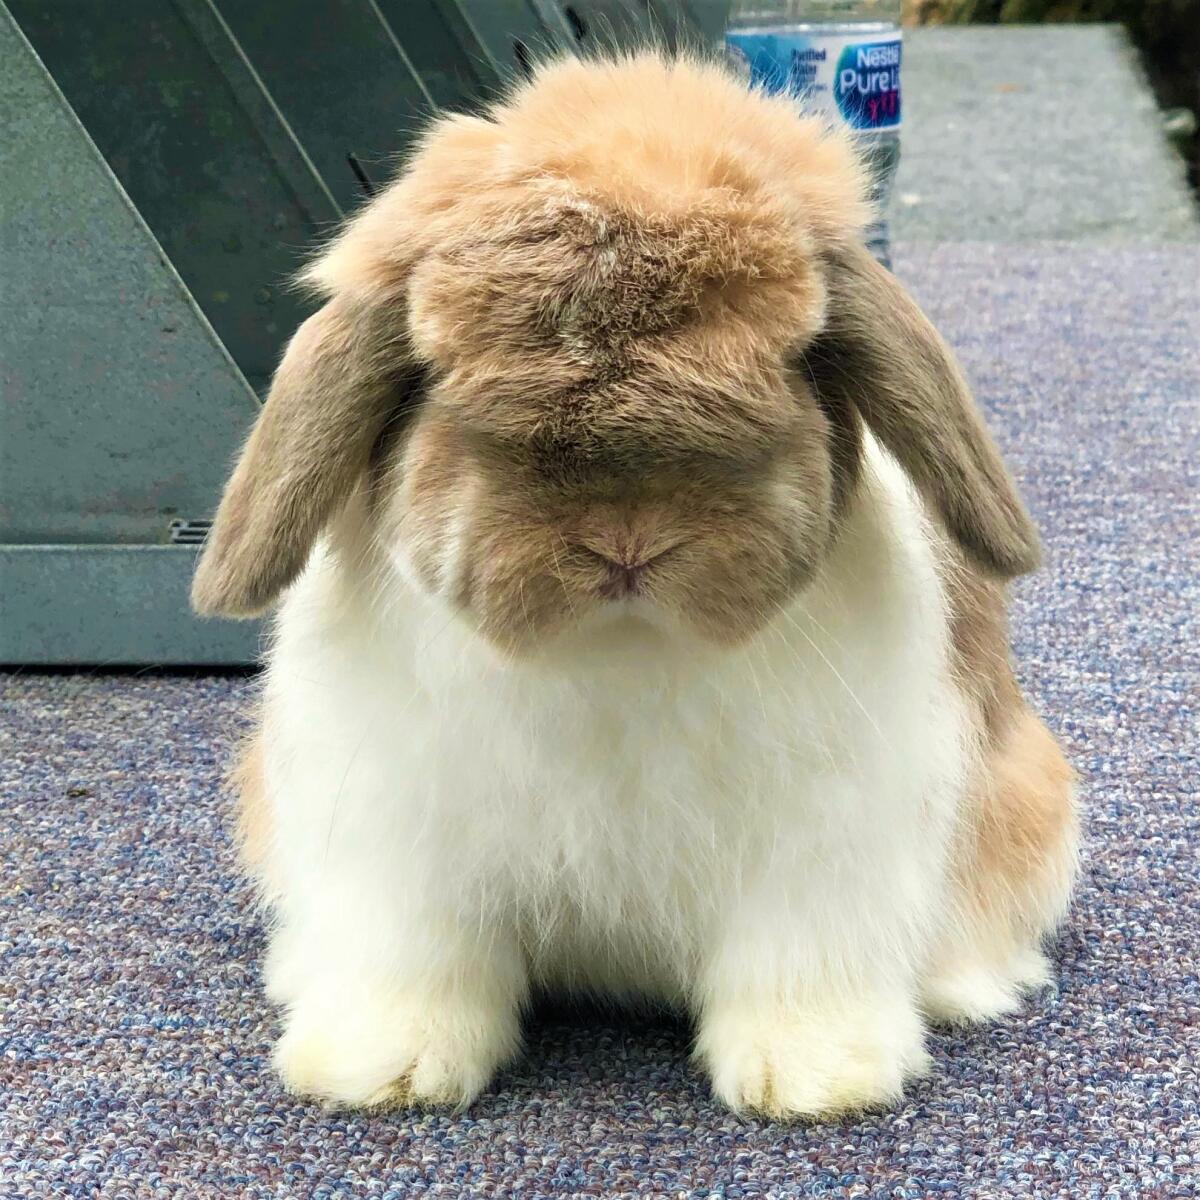 A Holland Lop.